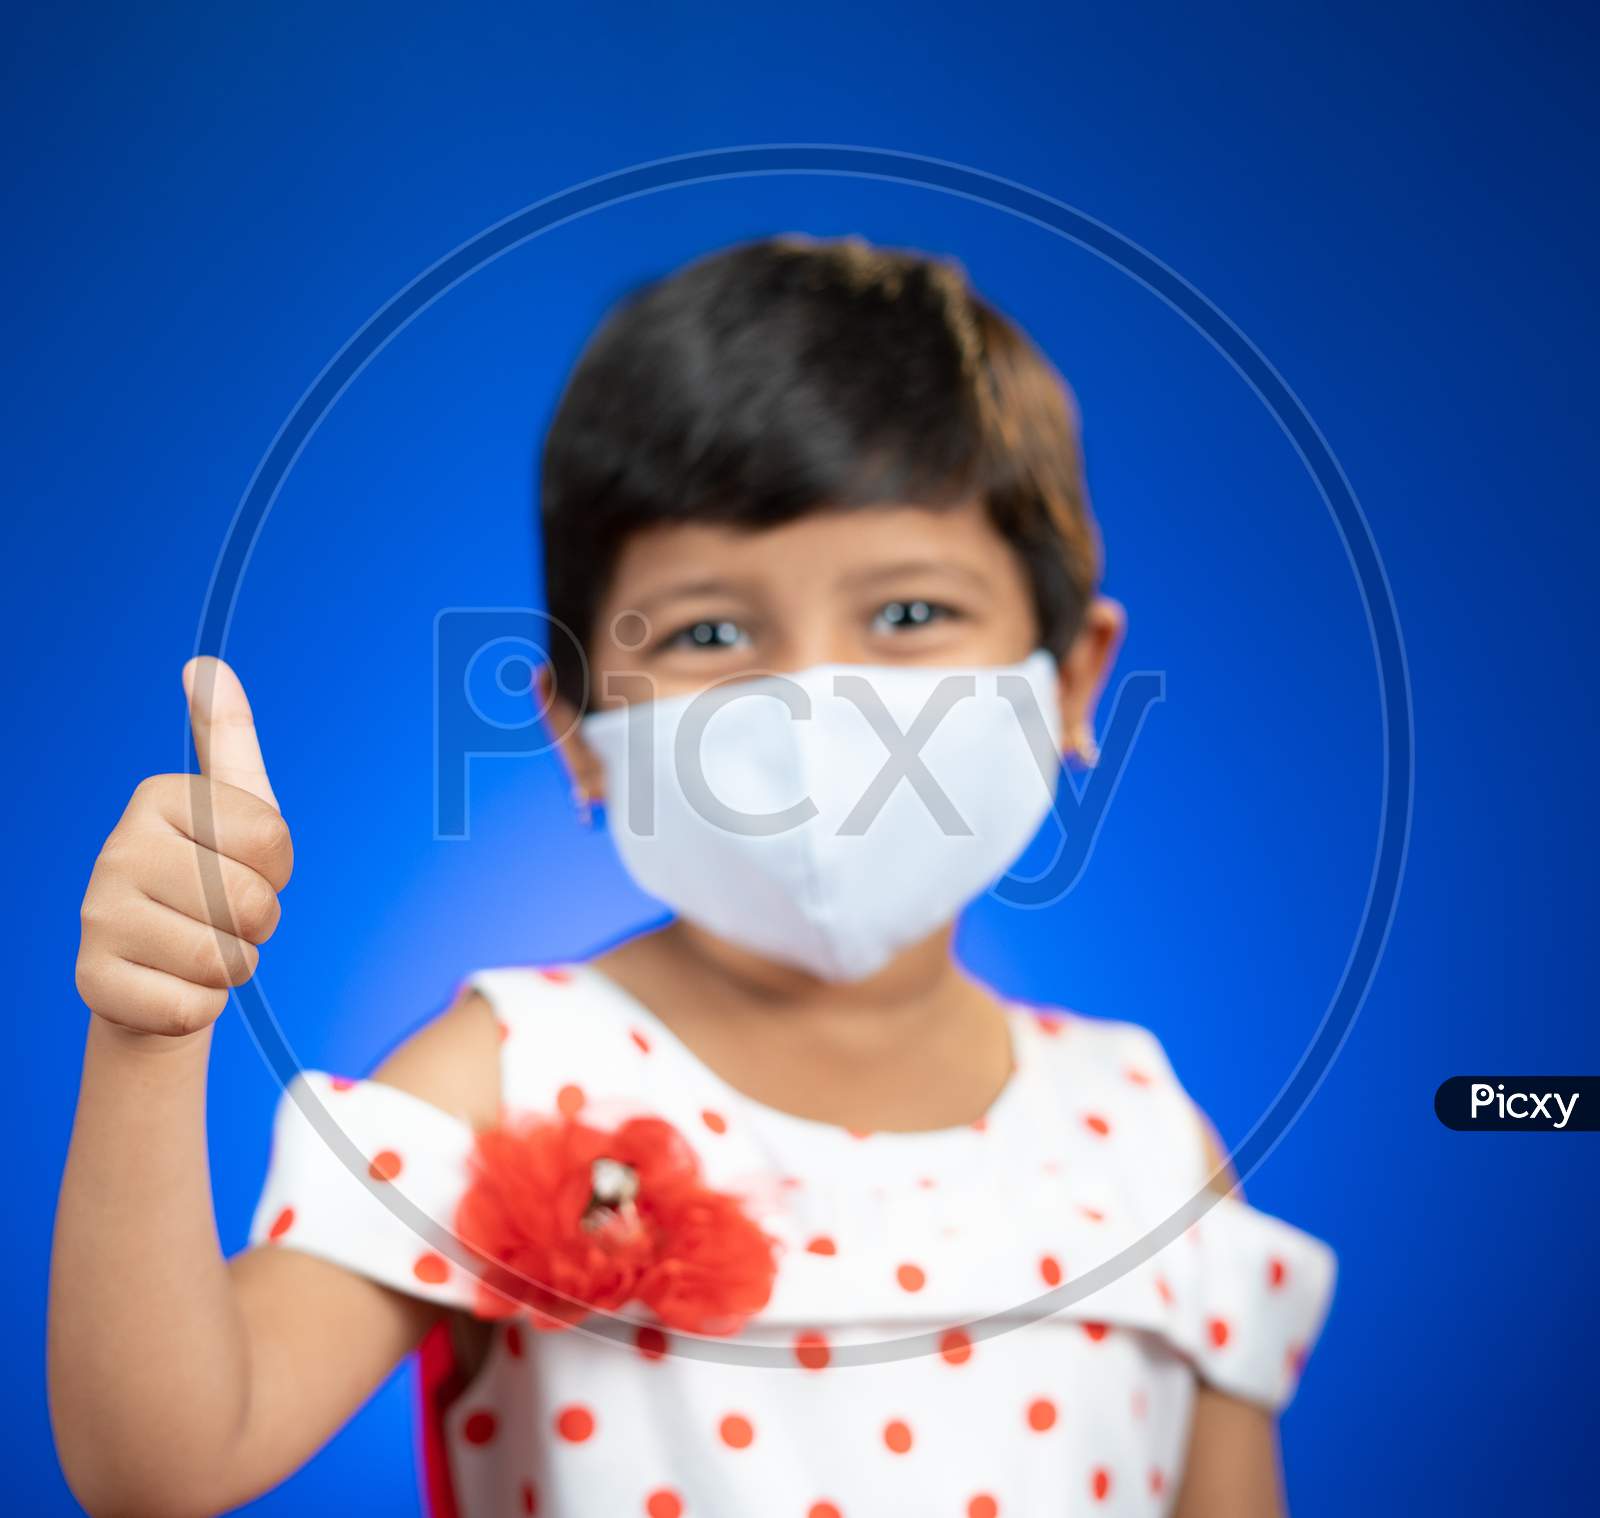 Focus On Thumb, Little Girl Child With Medical Face Mask Showing Thumps Up Gesture - Concept Showing Of Coronavirus Covid-19 Saferty Measures By Wearing Mask.